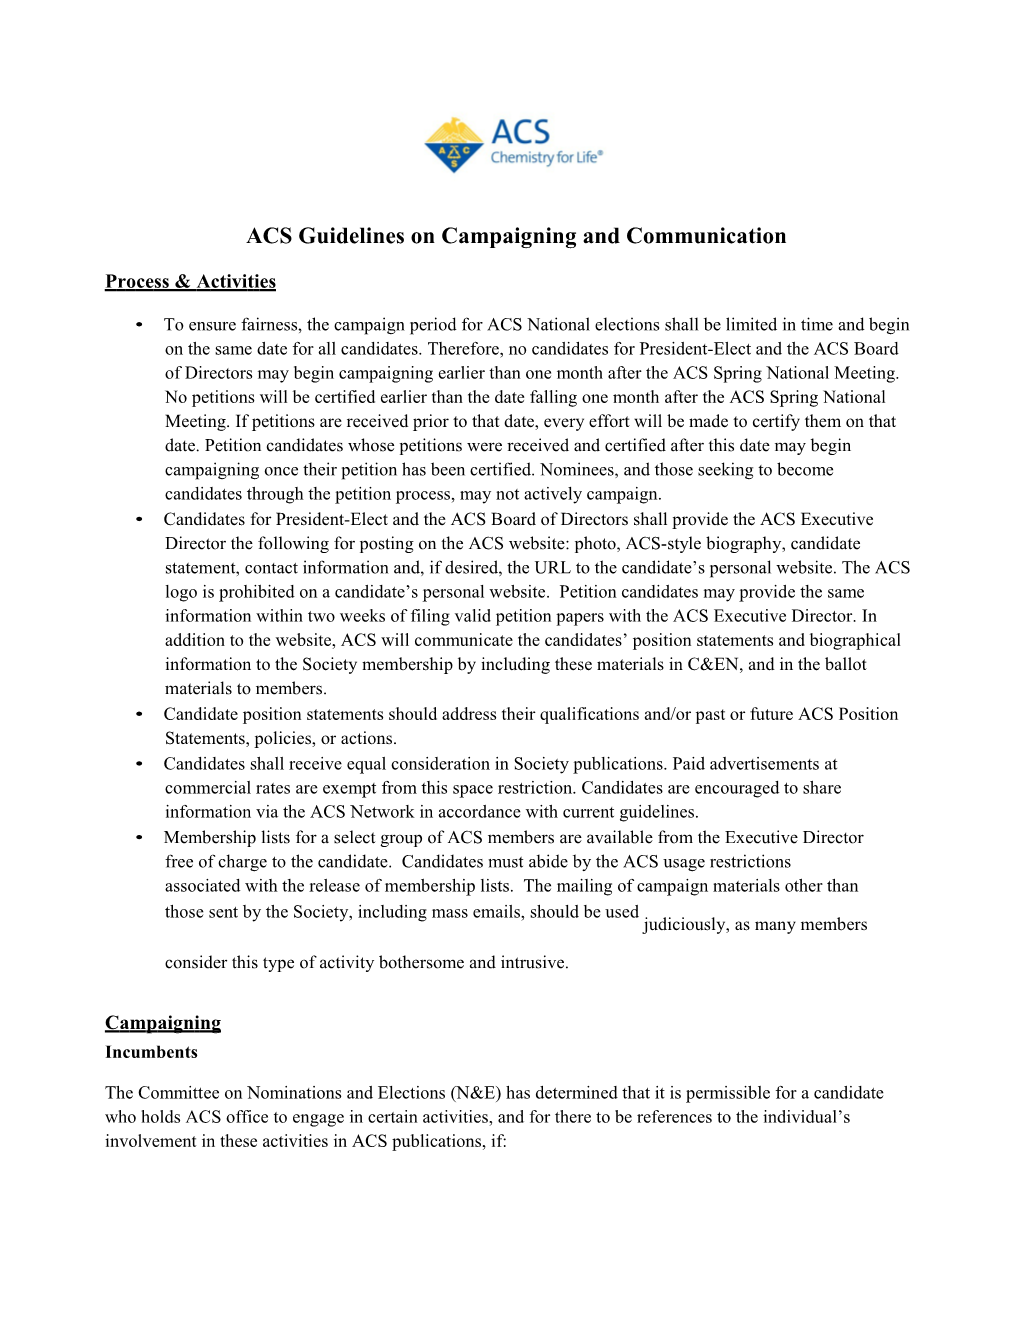 ACS Guidelines Oncampaigning and Communication